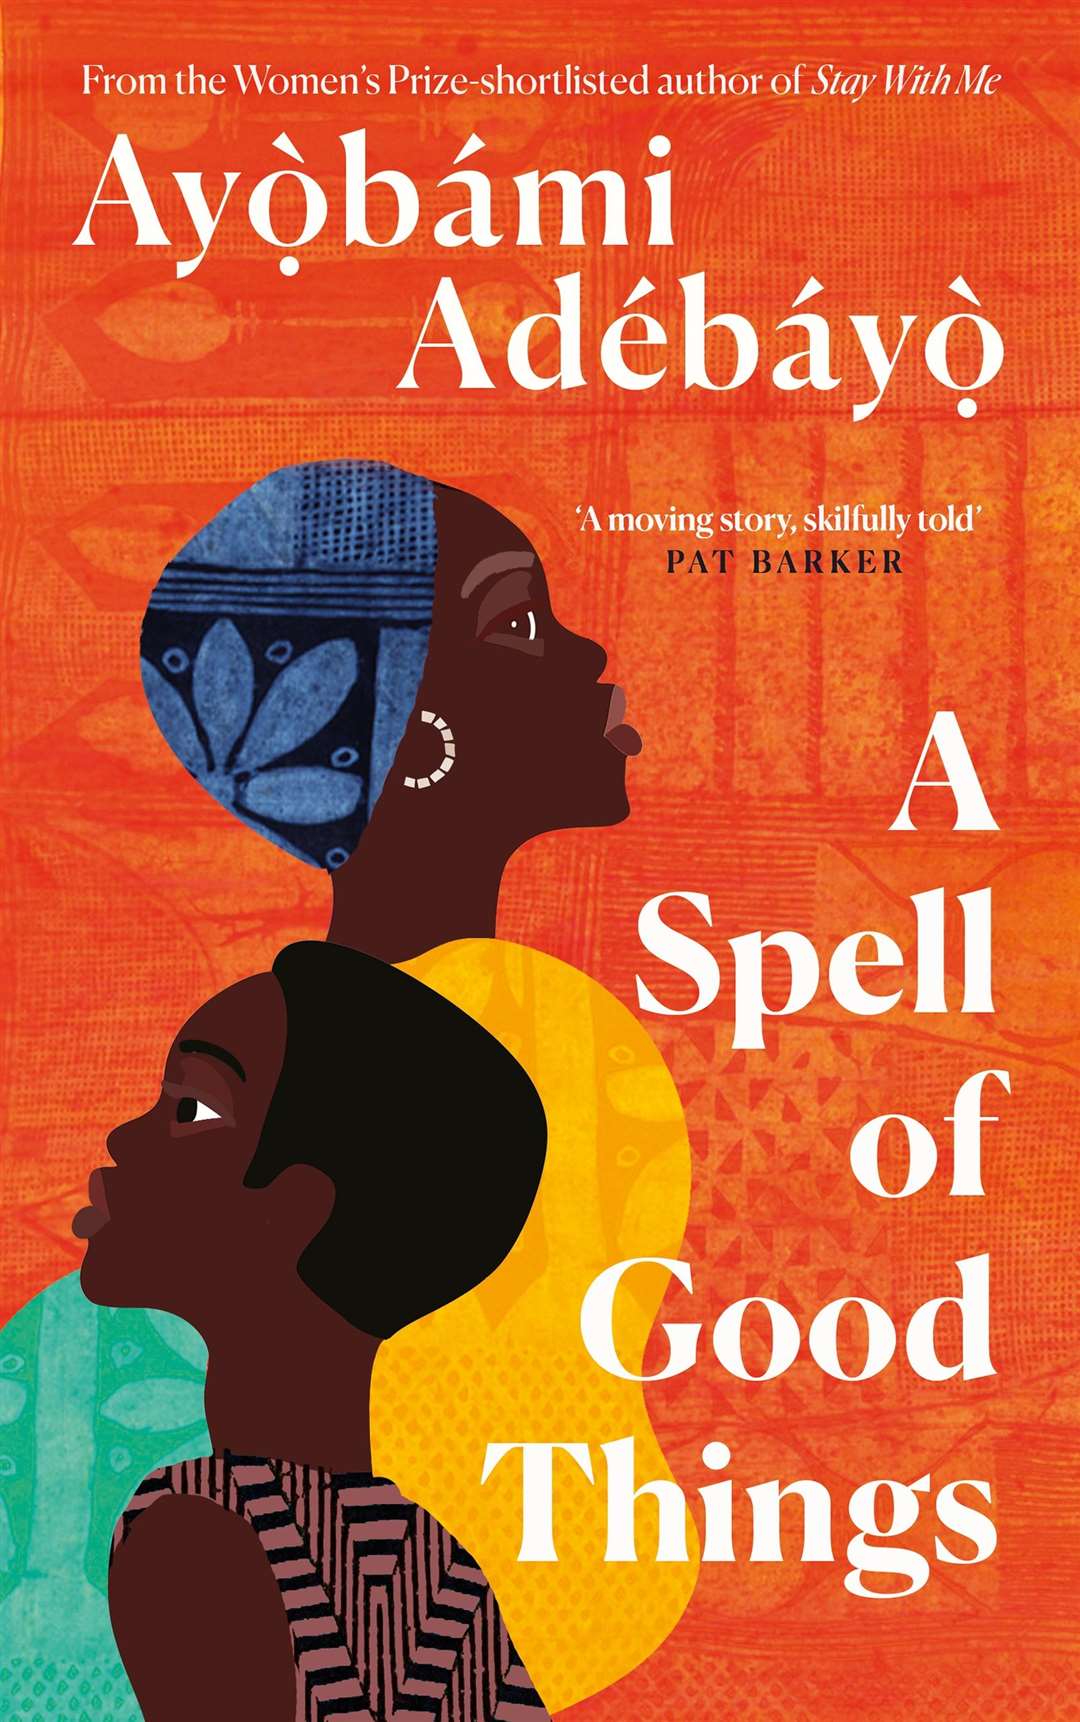 A Spell Of Good Things by Ayobami Adebayo (Canongate/PA)